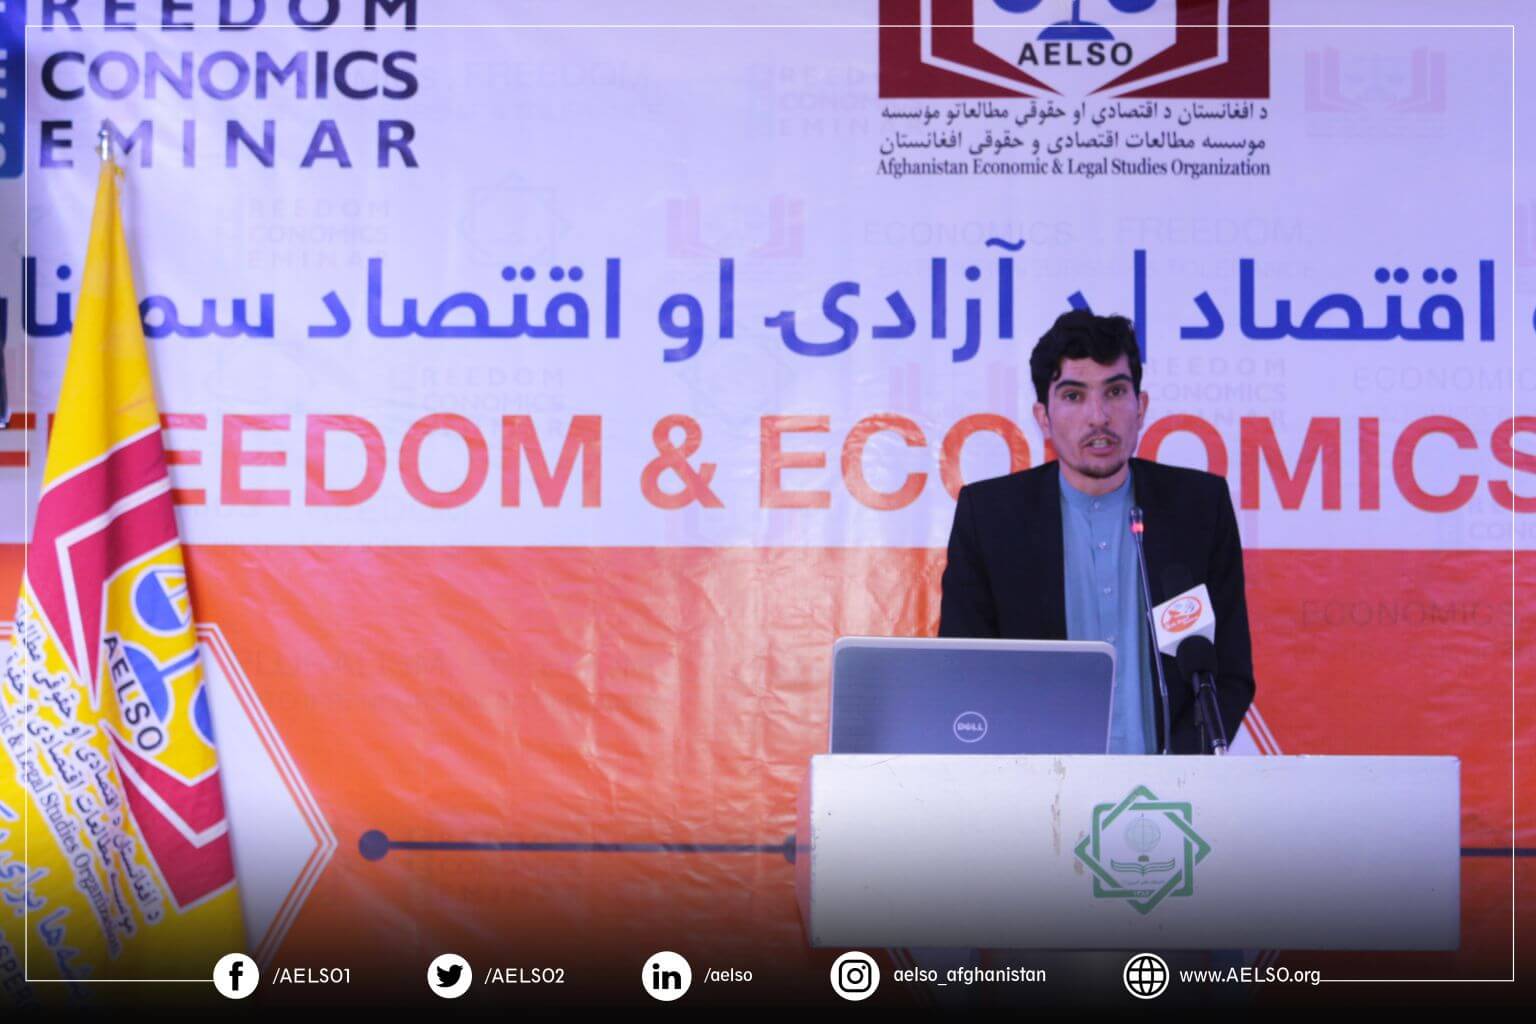 Bismellah Fitrat; another participant of Freedom & Economics Seminar in Ghazni Province